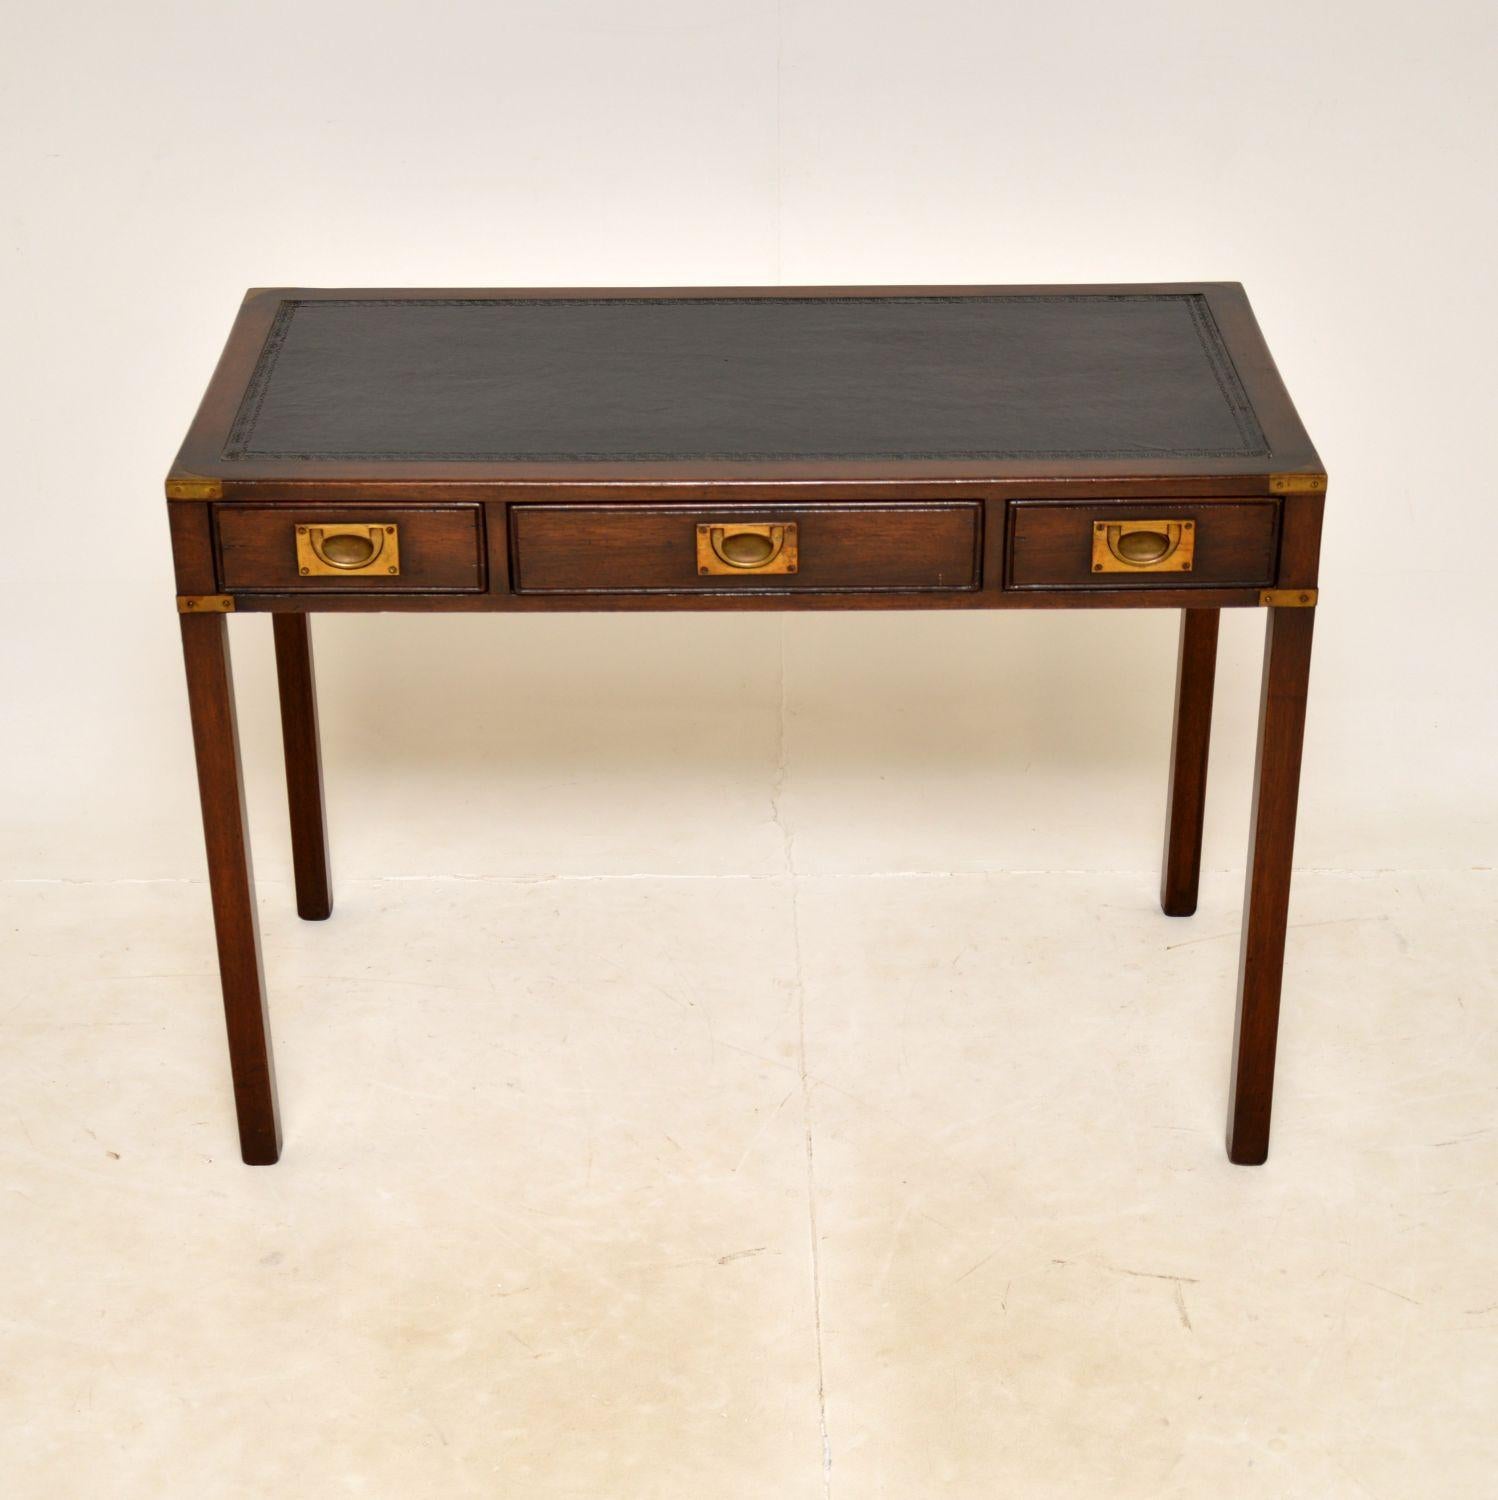 An excellent antique writing desk in the military campaign style. This was made in England, it dates from around the 1930’s.

It is very well made and has a very smart design. The dark wood is offset beautifully by the brass details. There is an